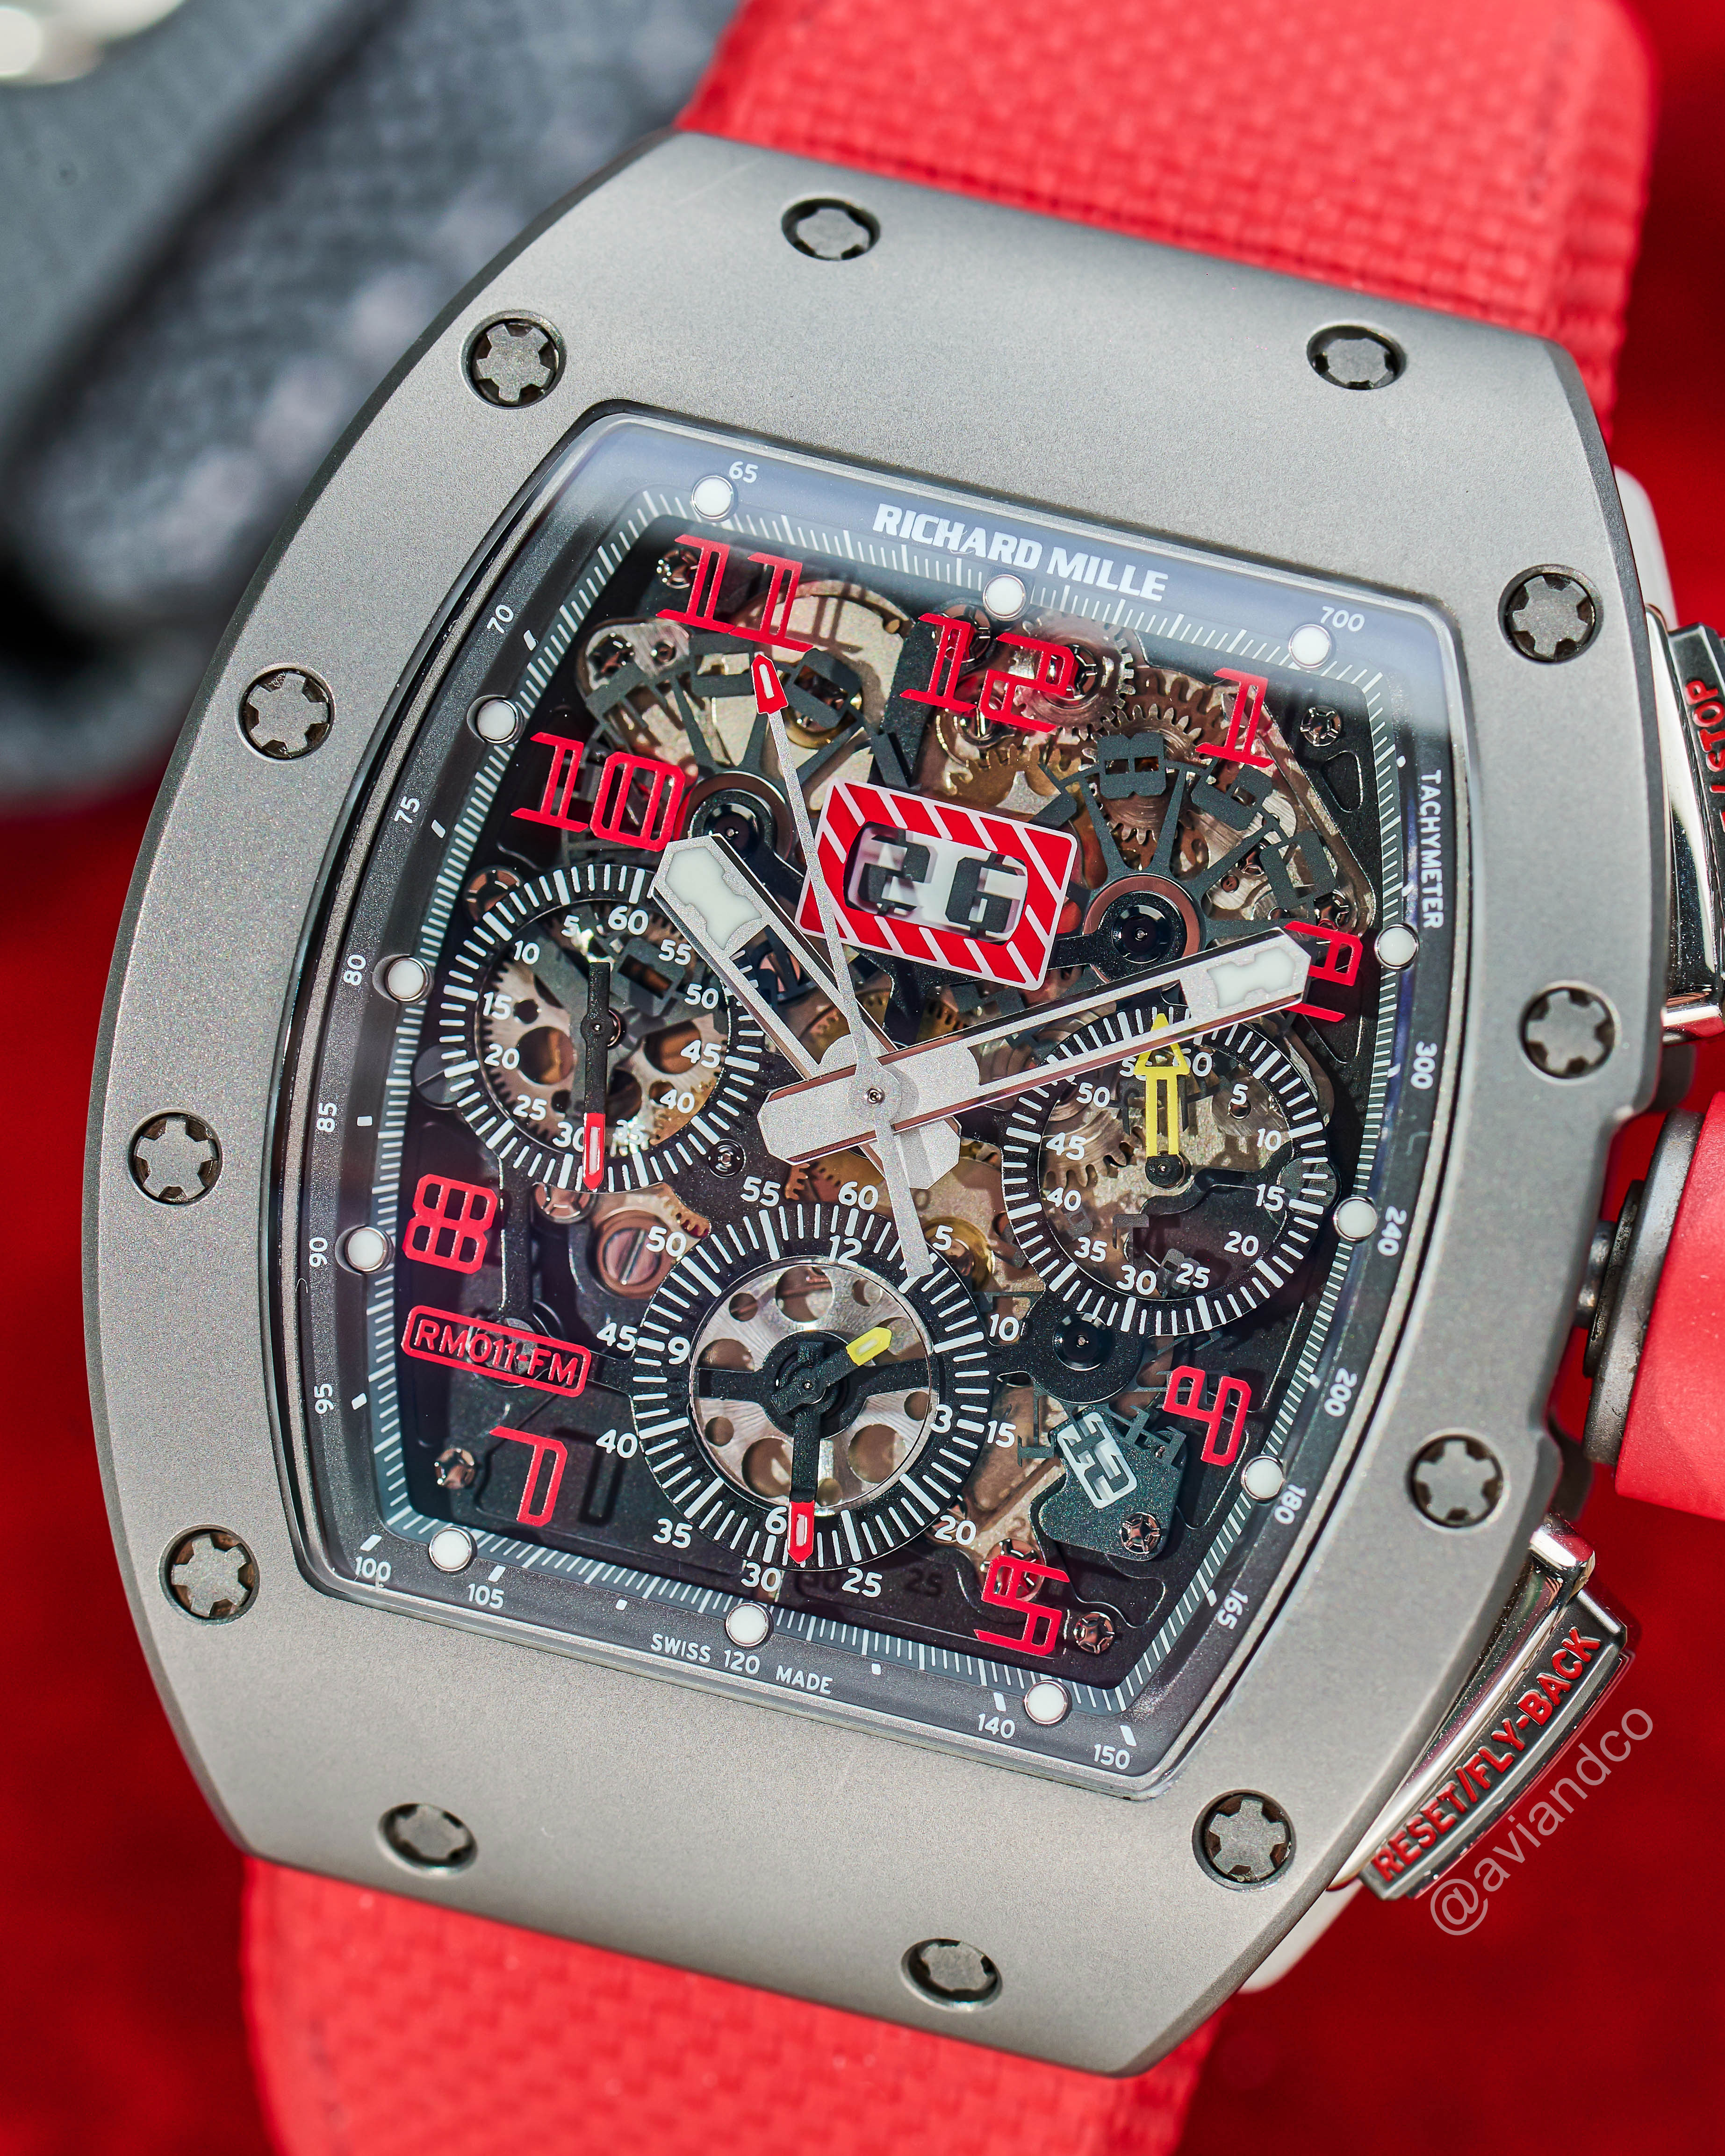 Close-up of Richard Mille Timepiece with Red Numbers and Red Strap.